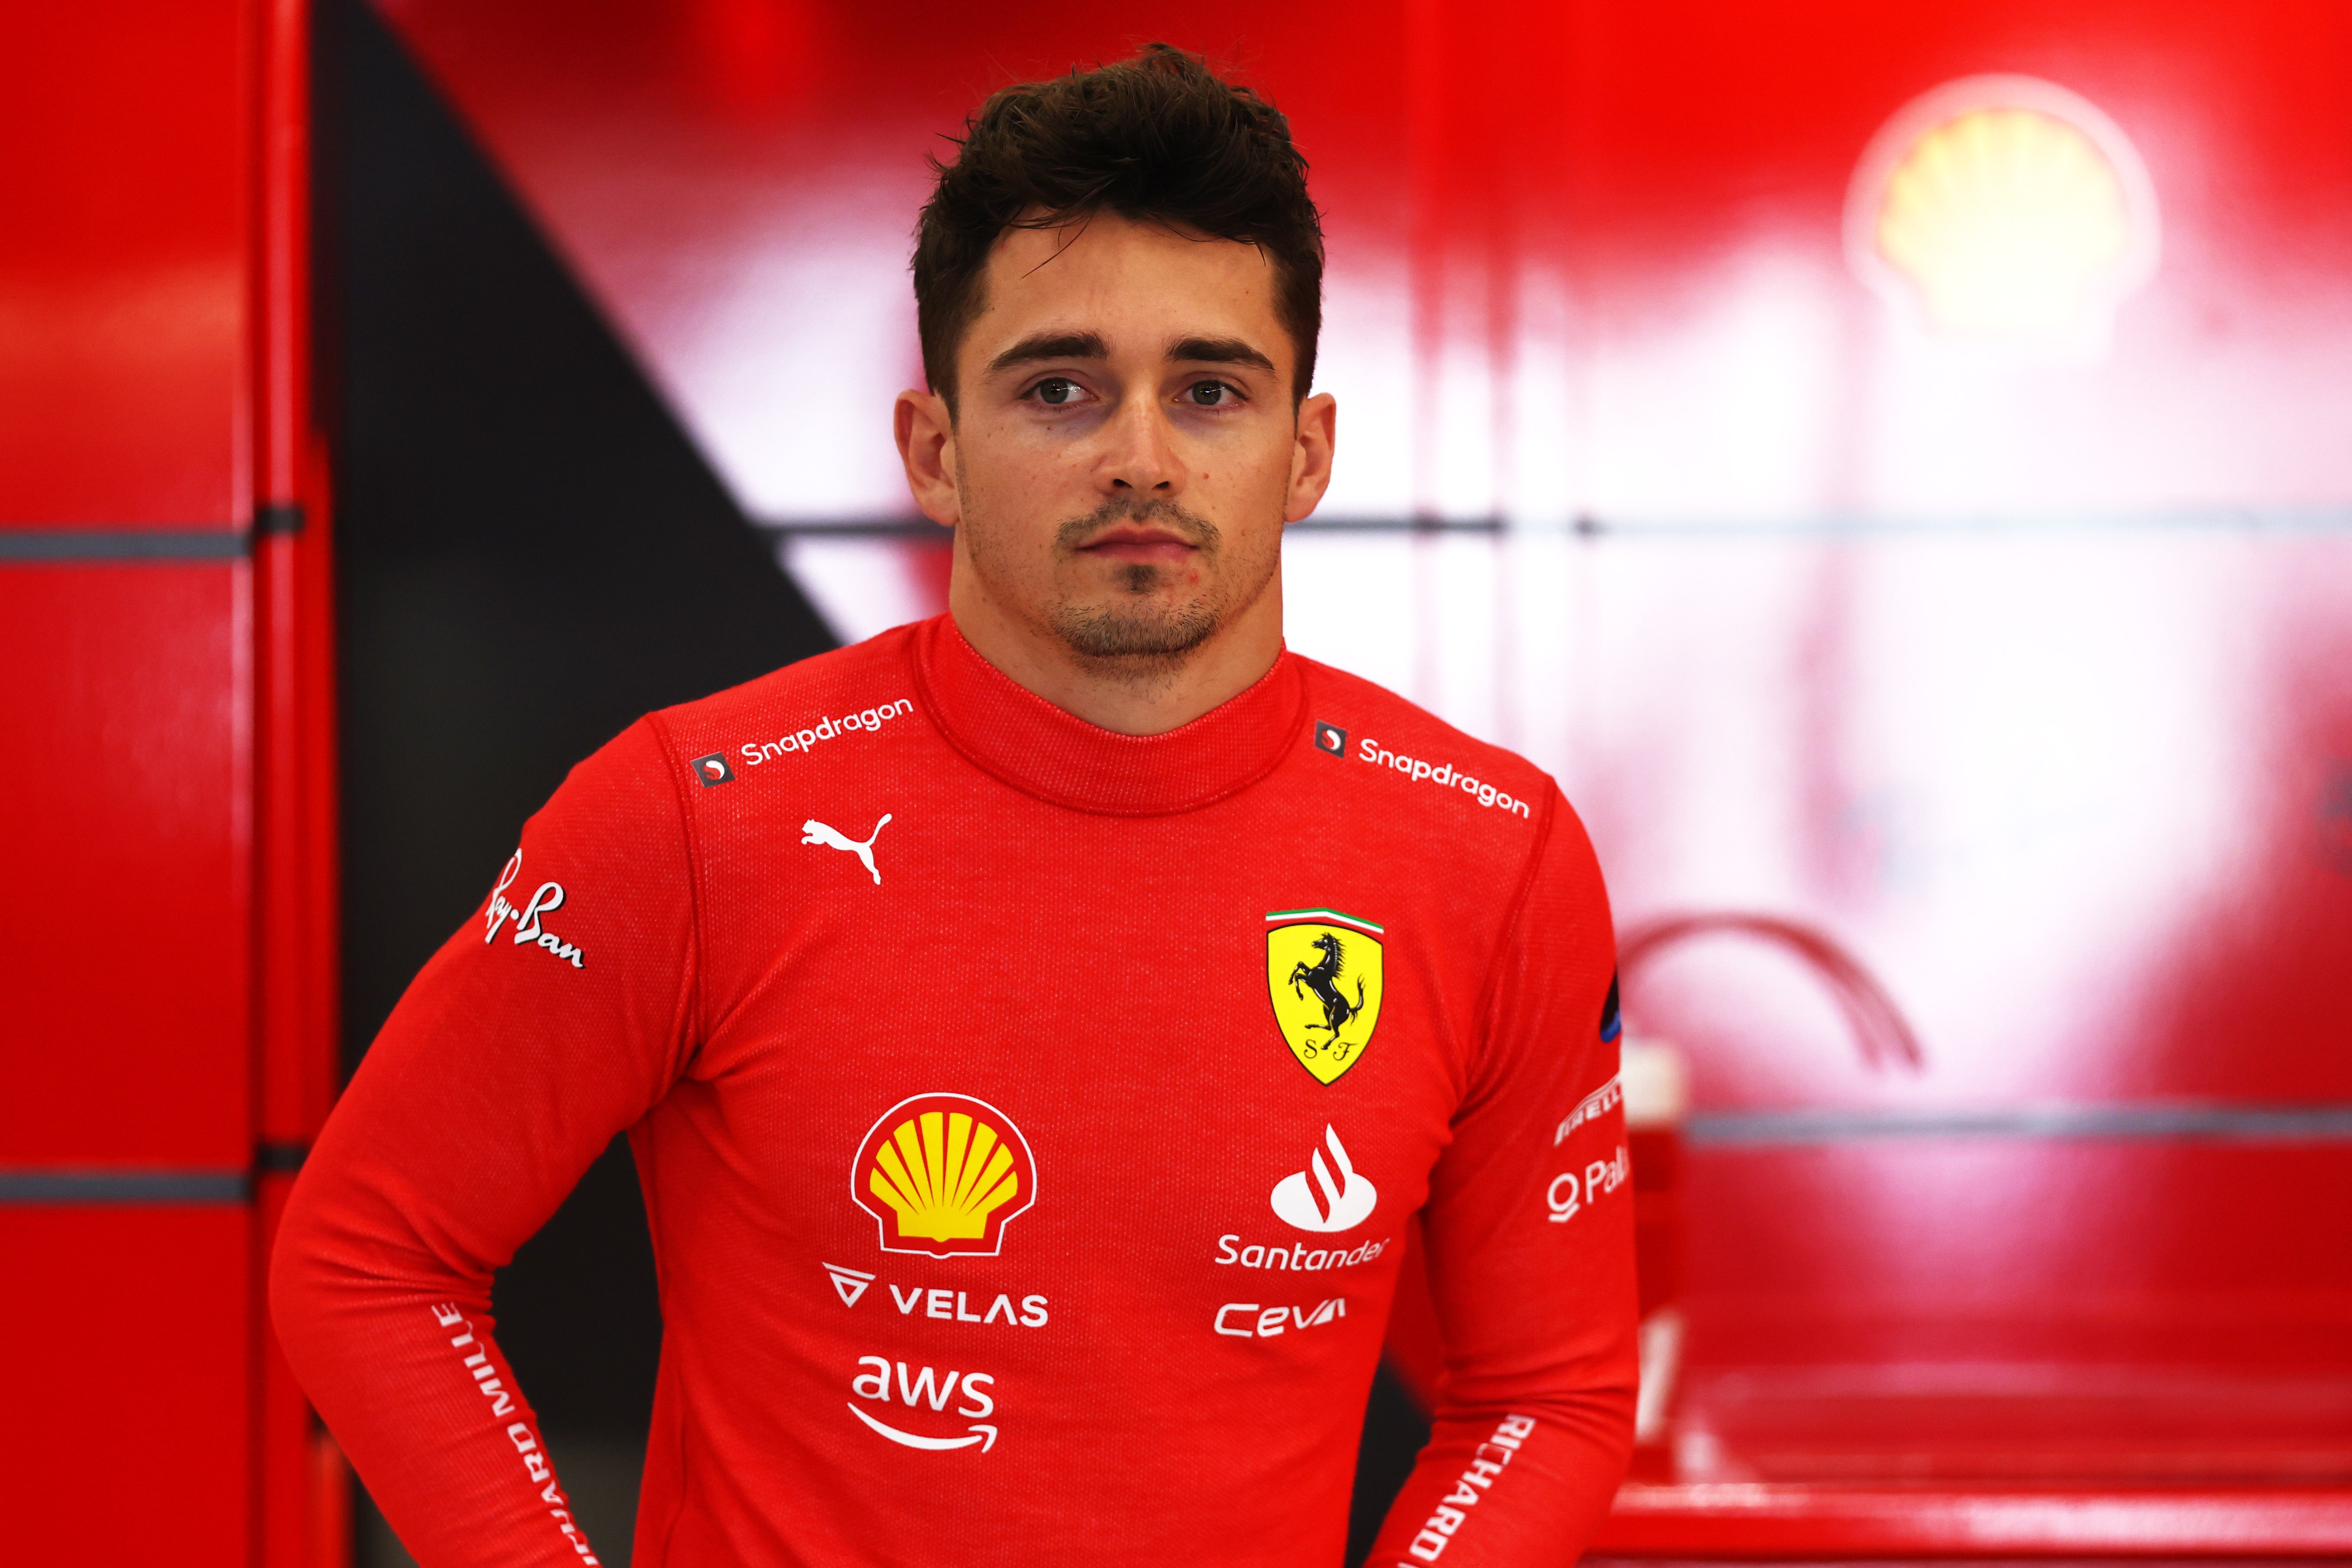 How Ferrari, Charles Leclerc Opened Huge F1 Points Lead with